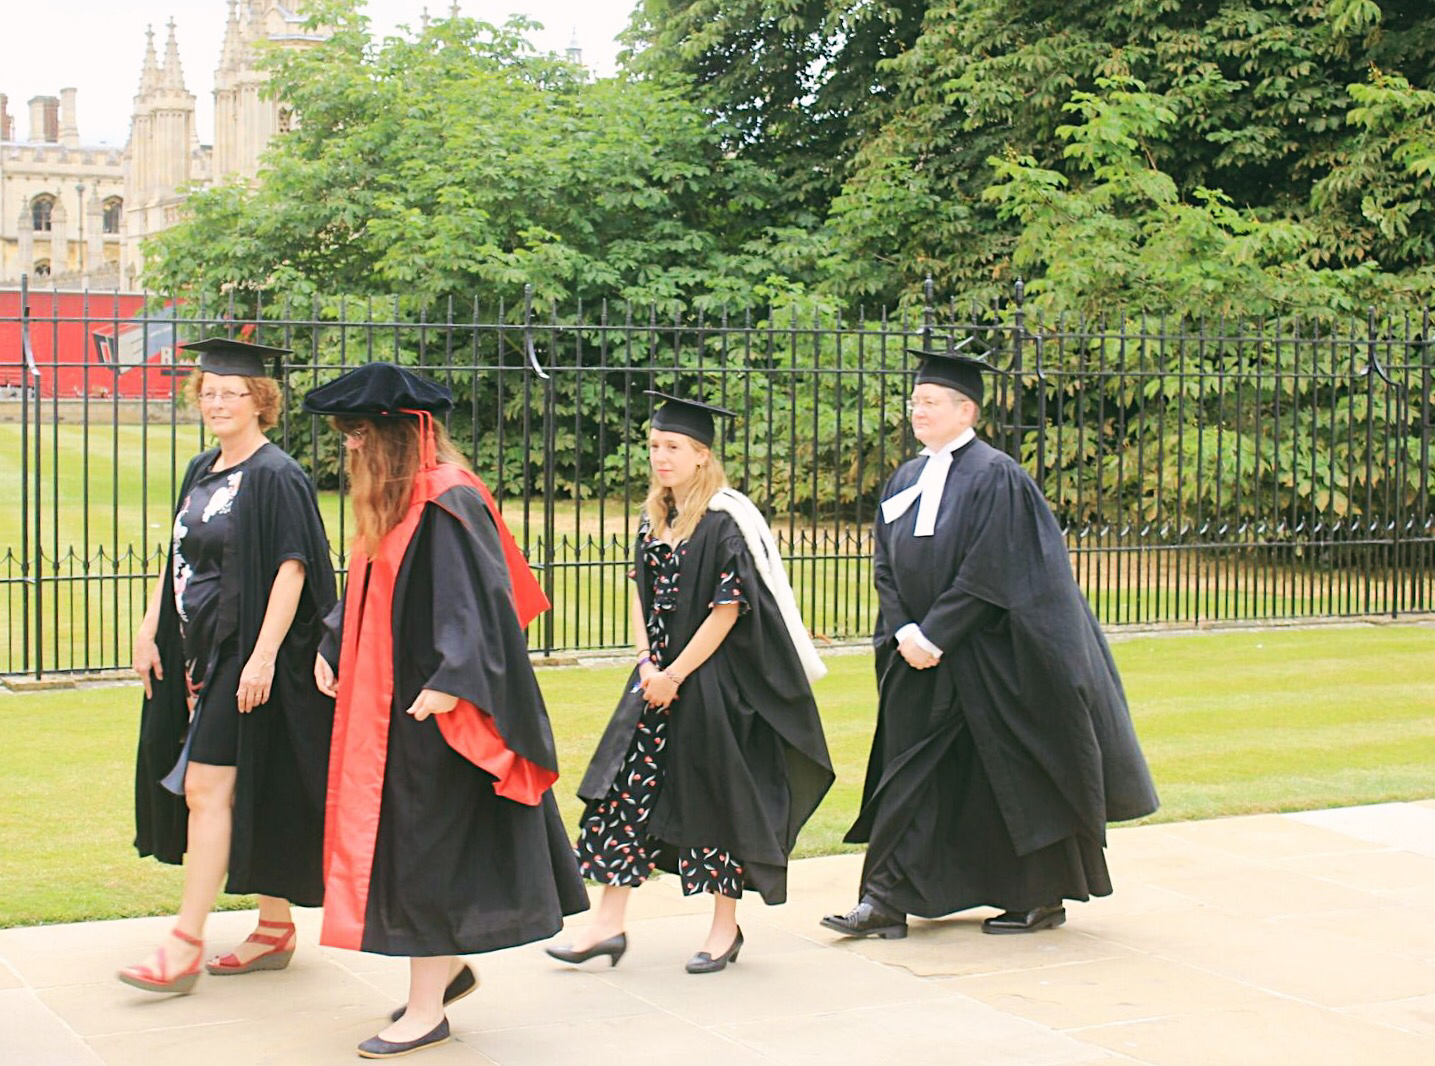 Photo of four people walking, wearing Cambridge ceremonial gowns